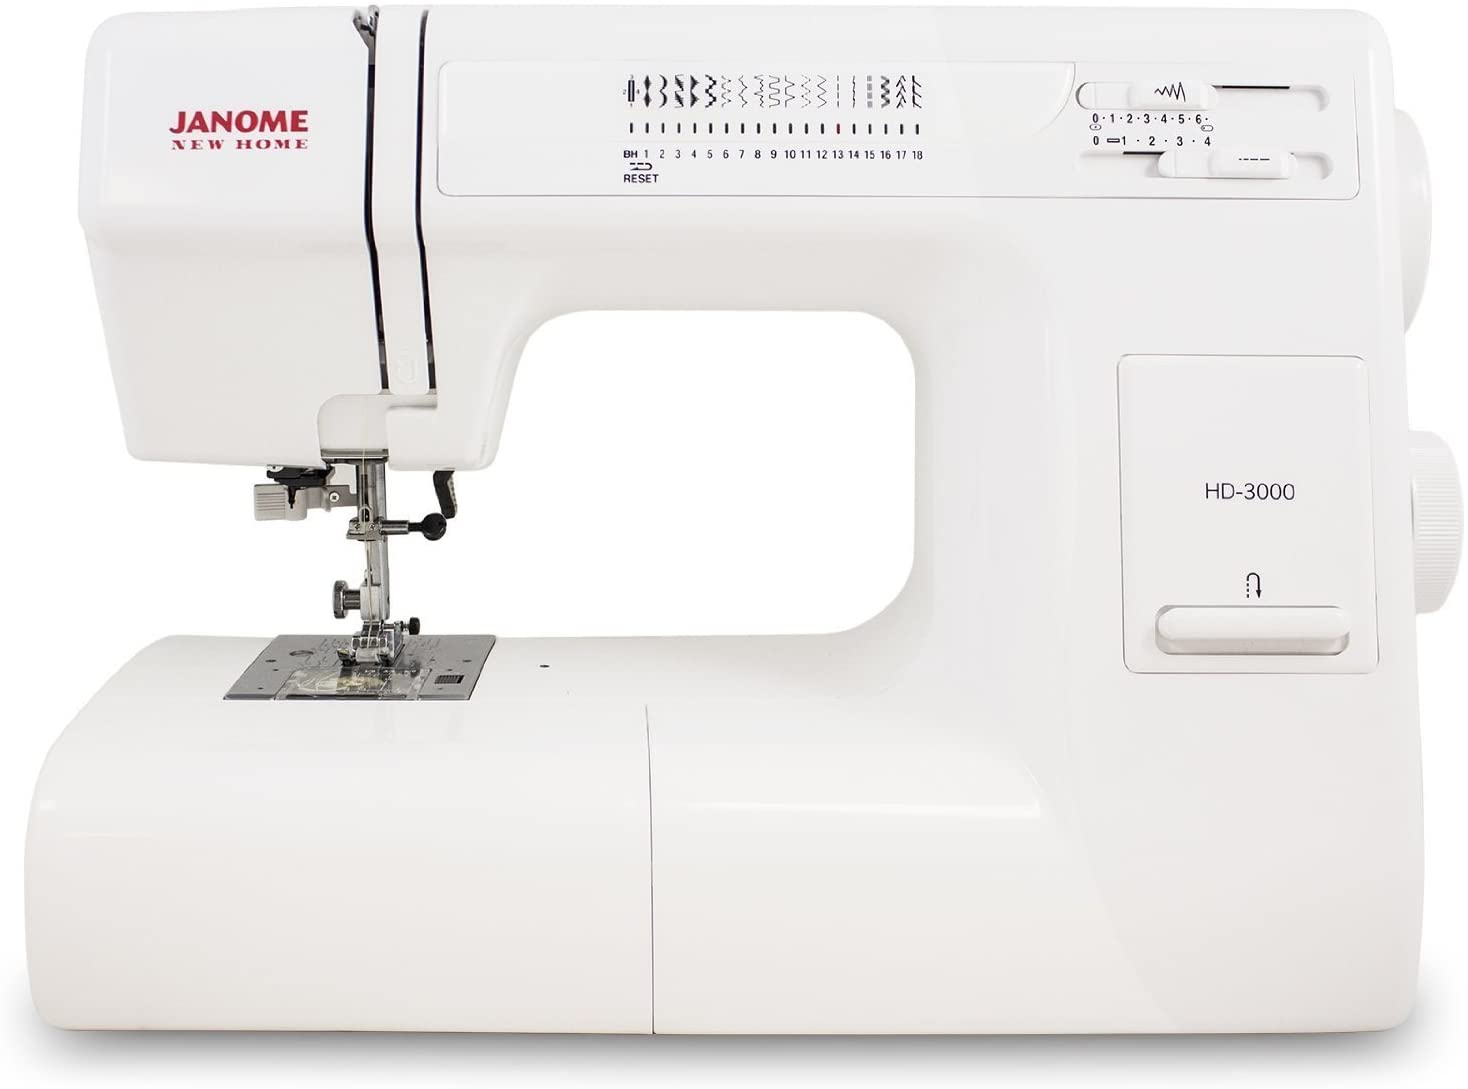 Janome HD3000 Heavy-Duty Sewing Machine - Best Janome Sewing Machine for Quilting